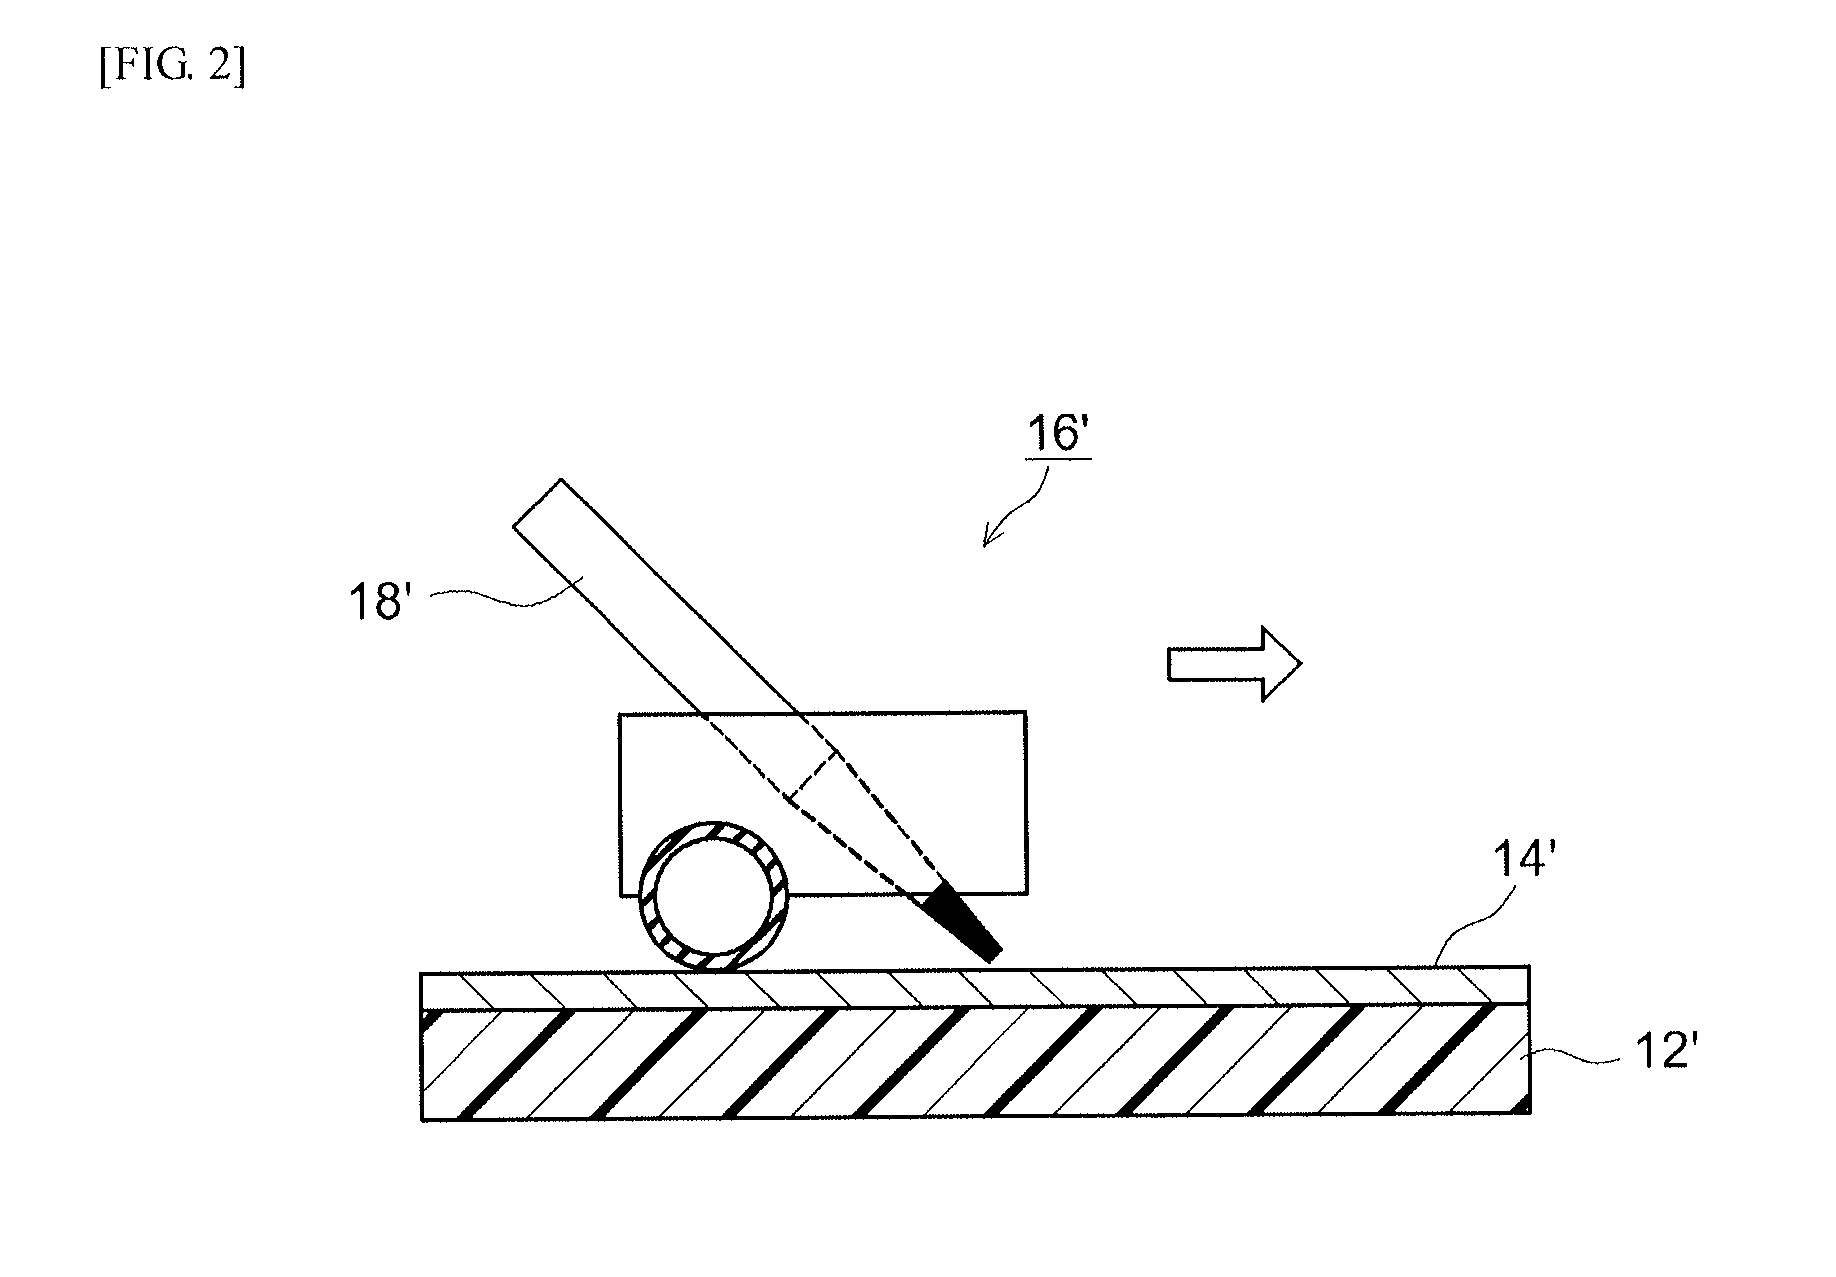 Flexible wiring board and use thereof